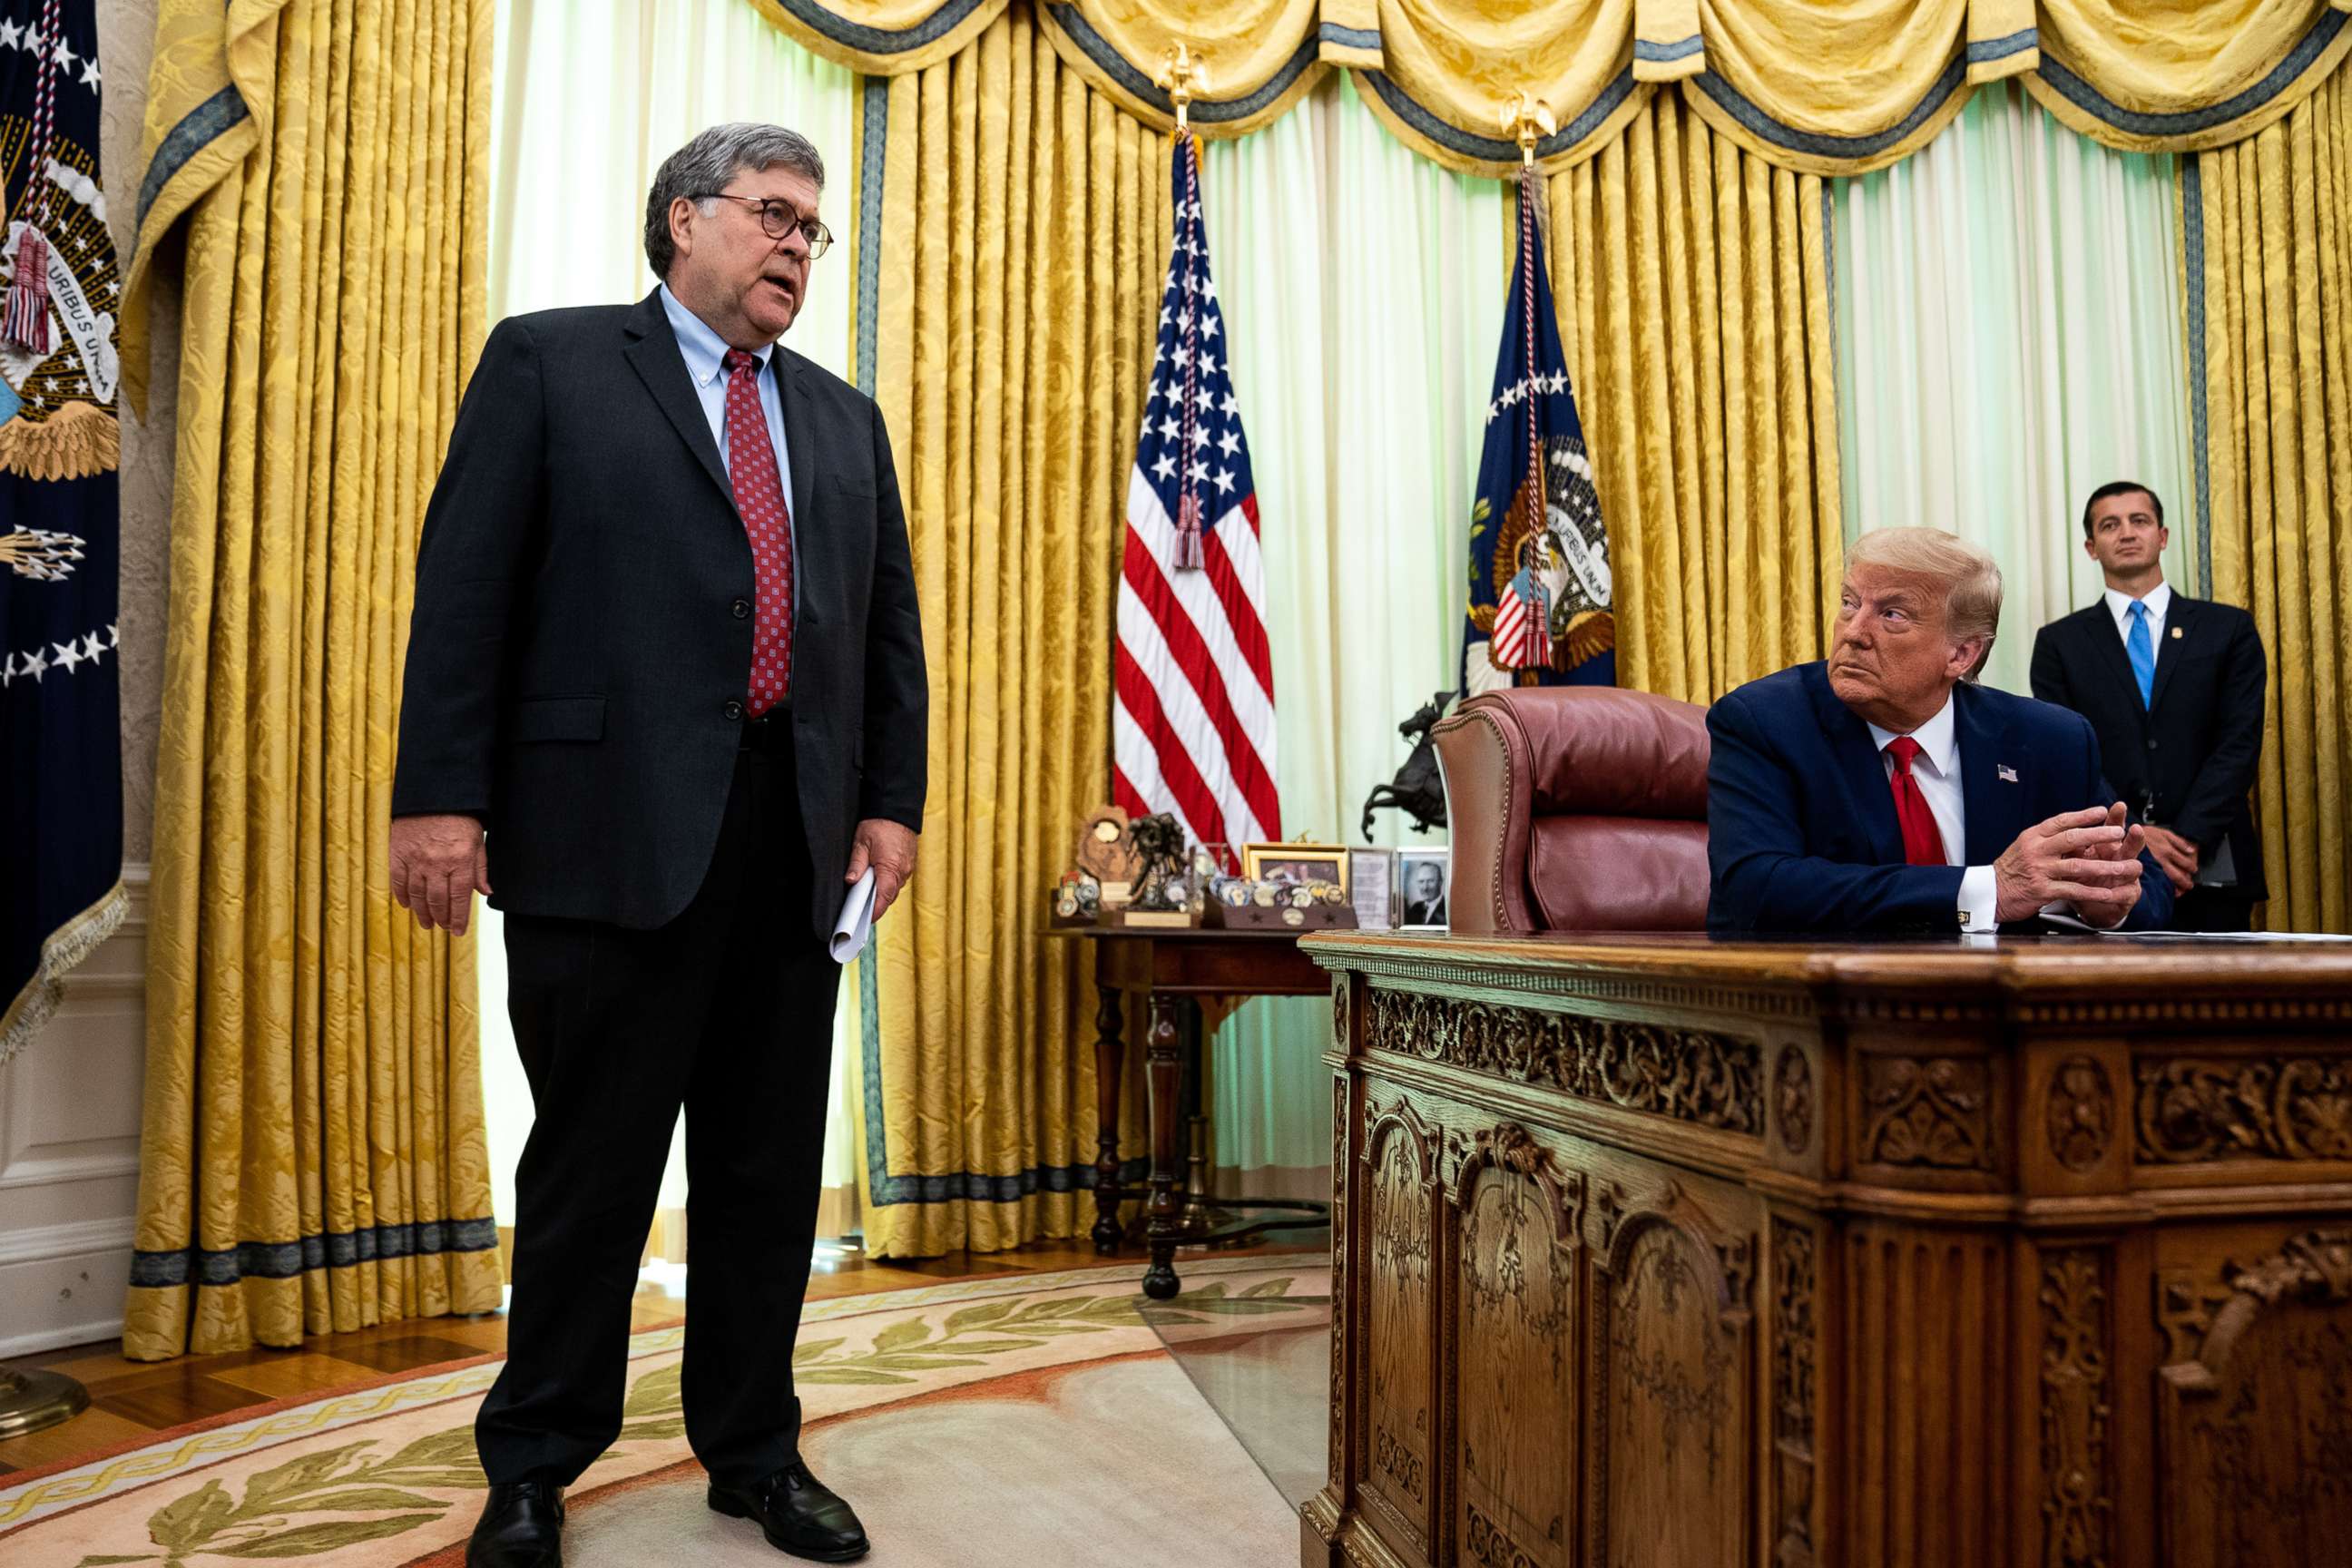 PHOTO: Attorney General William Barr speaks as President Donald Trump listens in the Oval Office of the White House after receiving a briefing on July 15, 2020, in Washington, DC.